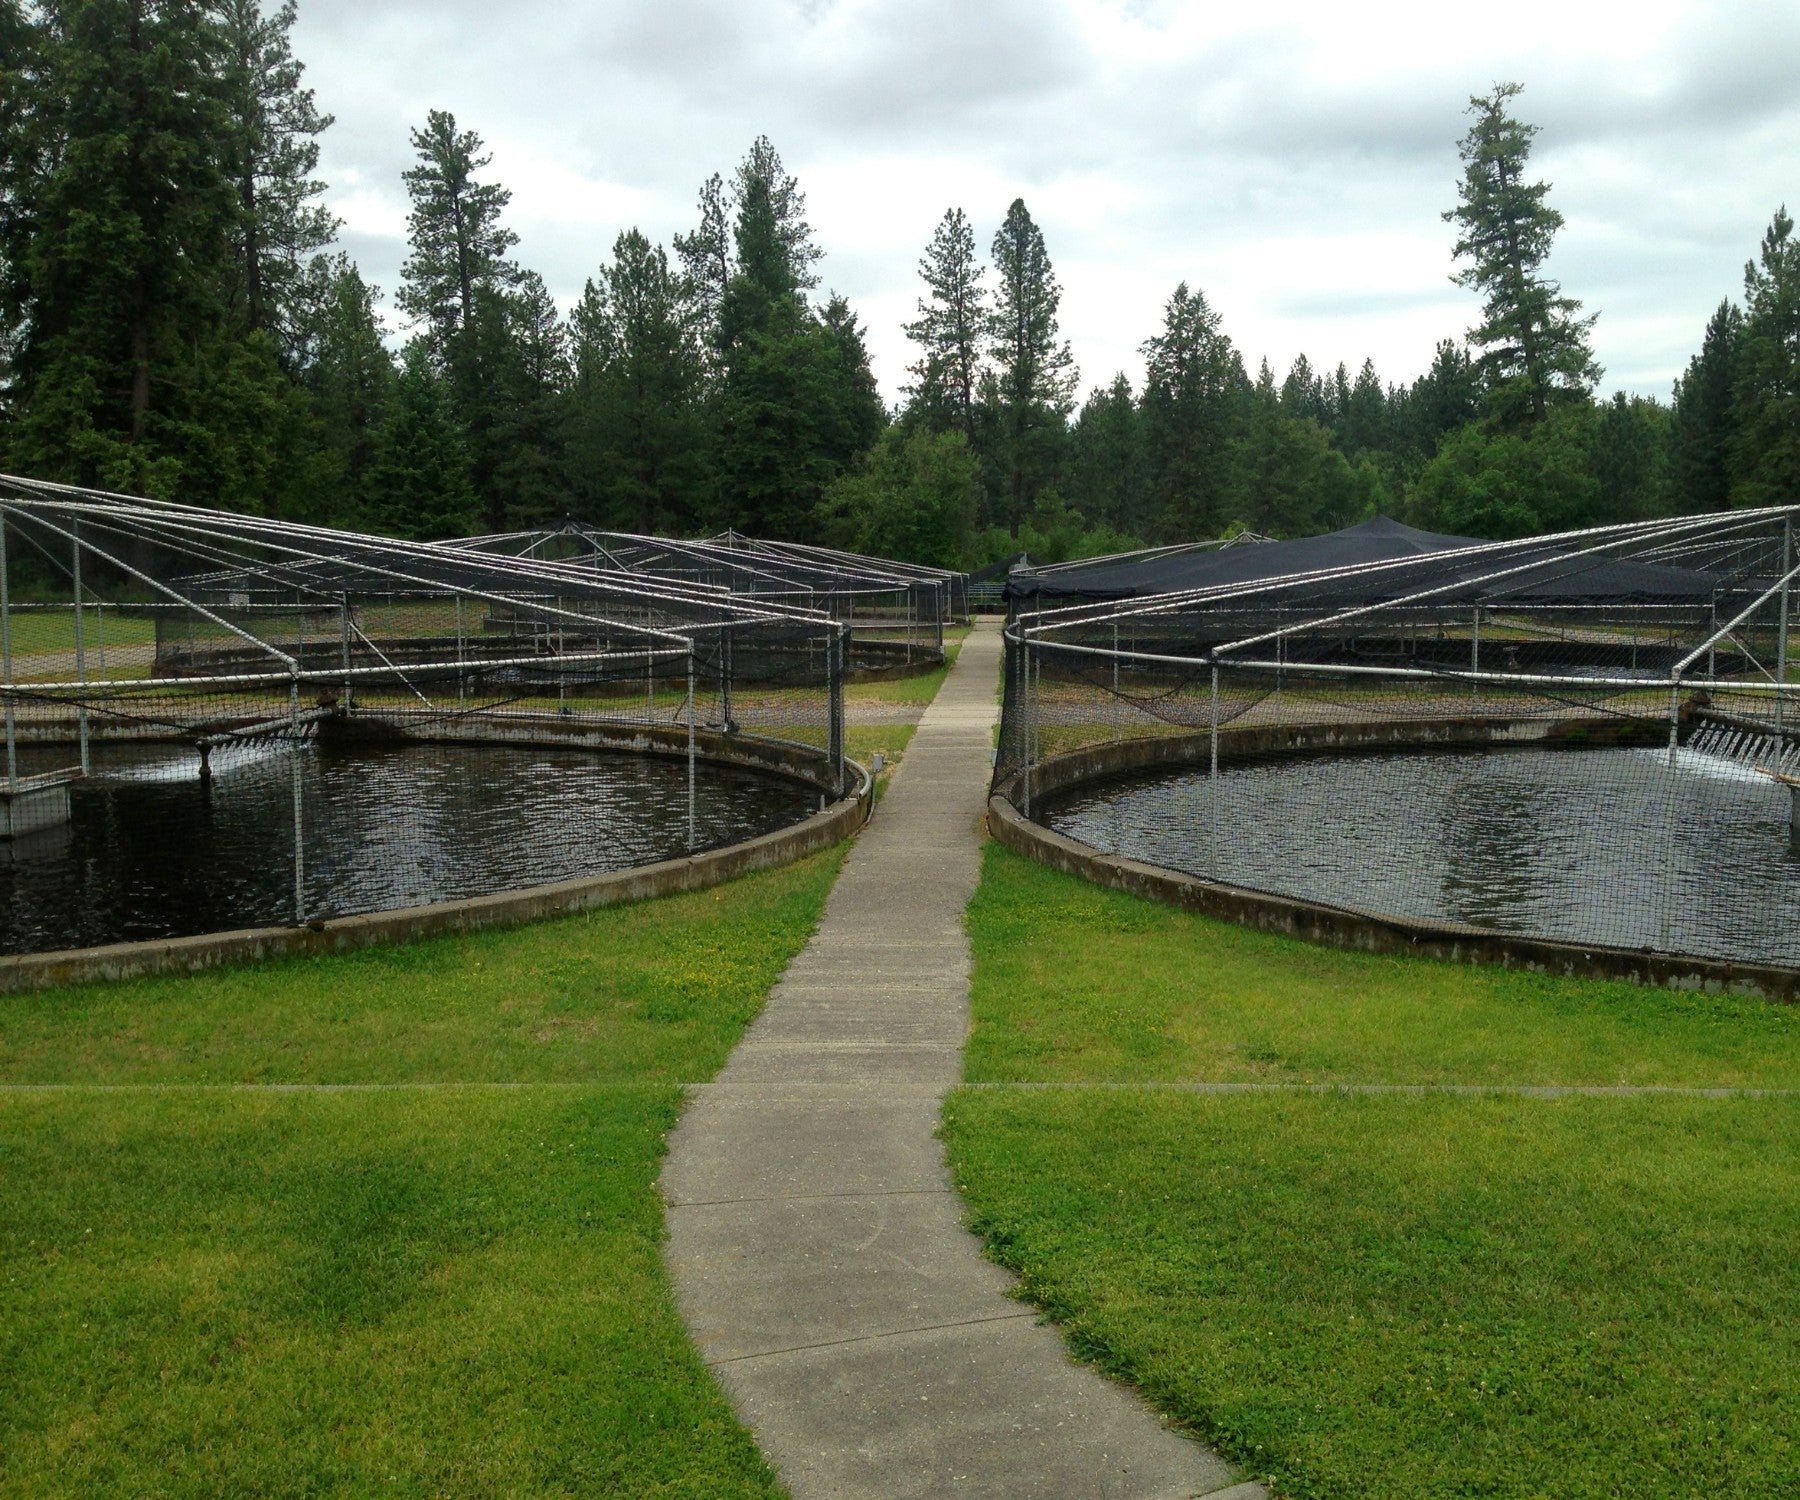 custom net solution to protect the fish hatcheries from birds and predators